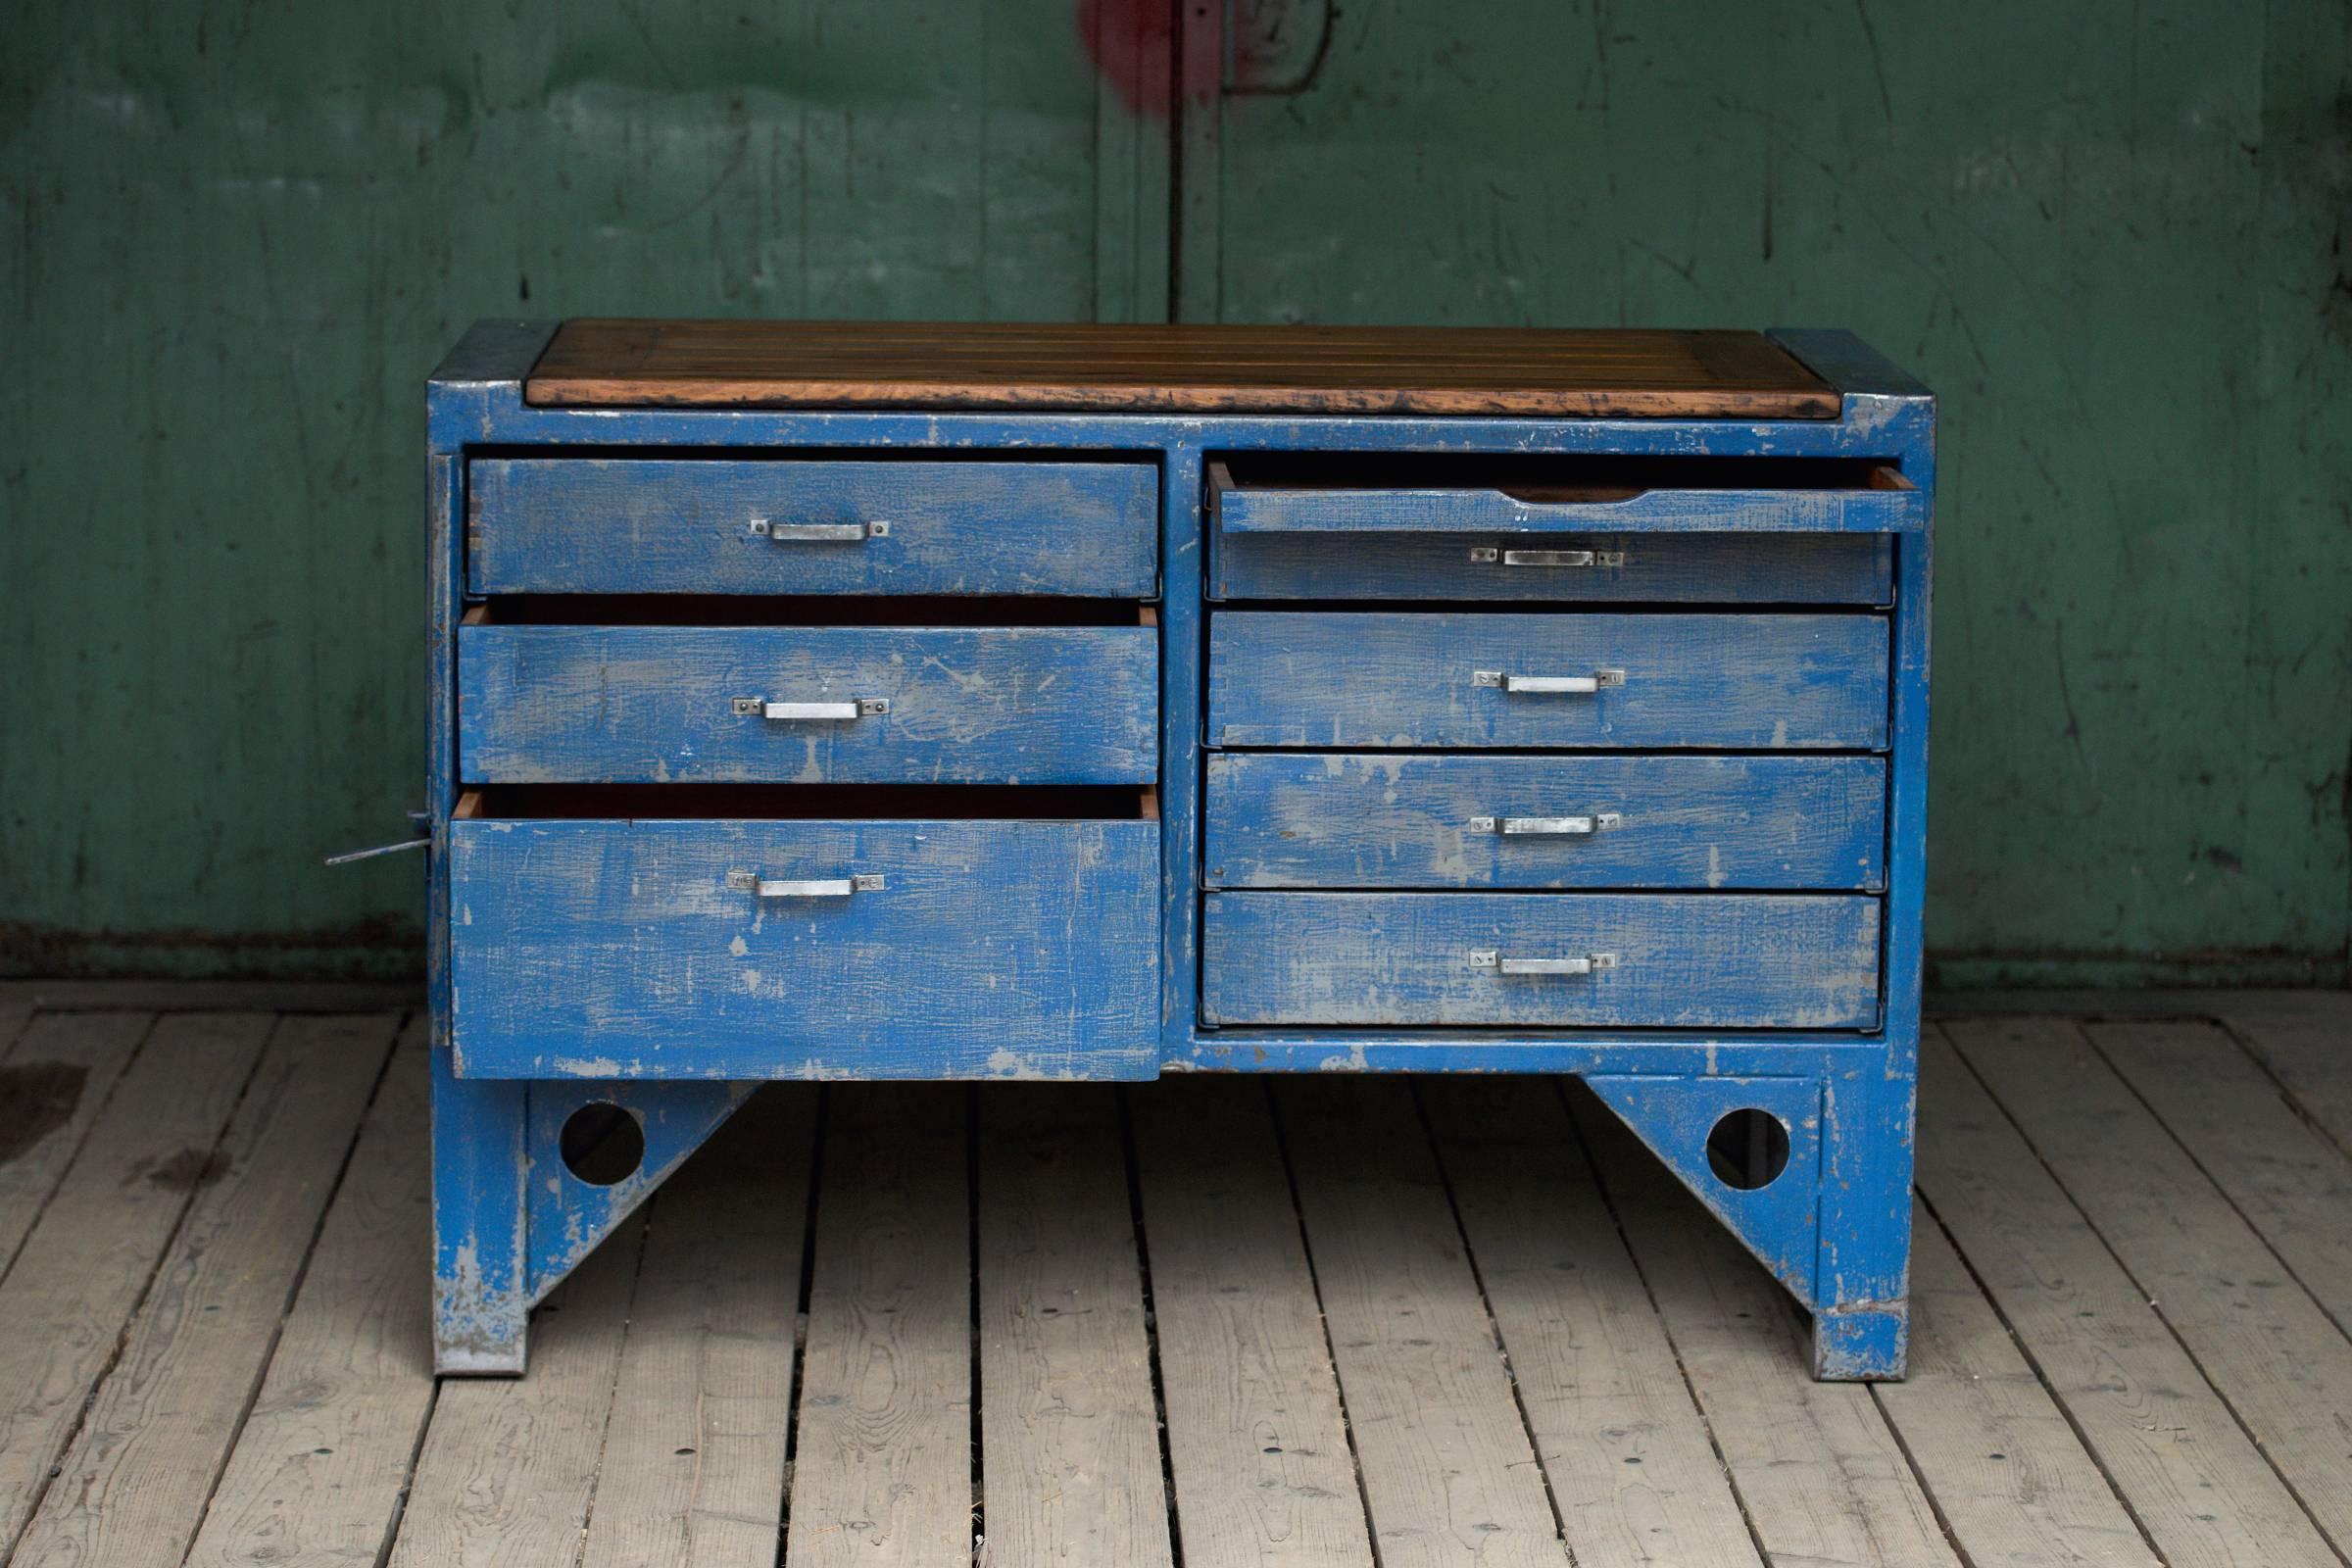 Workbench from a Czech factory produced in the 1940s.
Features a stabile frame made of steel sheet with wooden drawers. The left side could be locked and closed. The workbench was completely cleaned and restored. Very nice vintage condition.

We